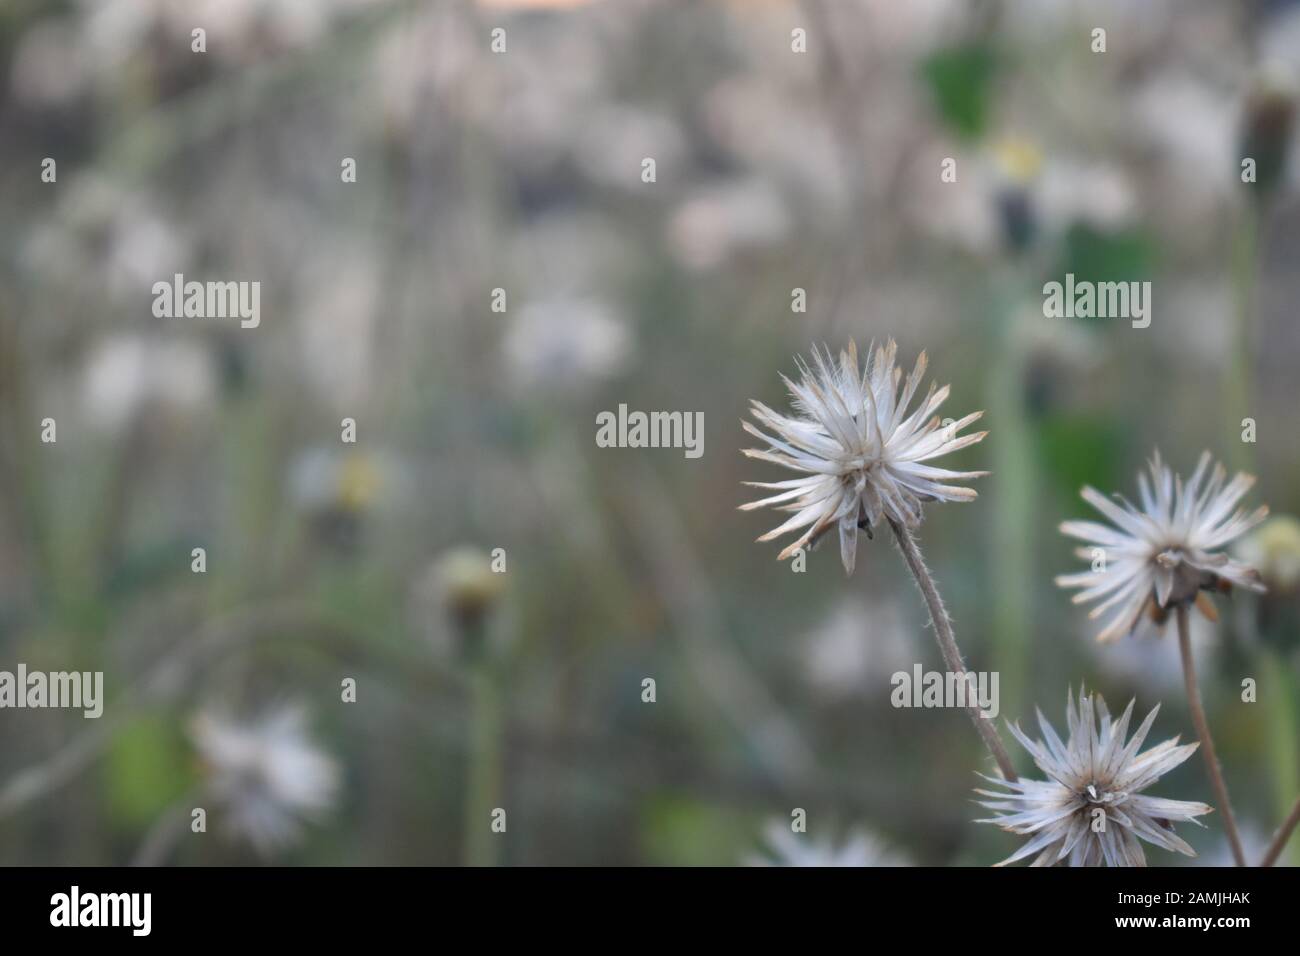 Achenes of tridax daisy or coatbuttons flower or Tridax procumbens containing dried seeds. Surakarta, Indonesia. Stock Photo